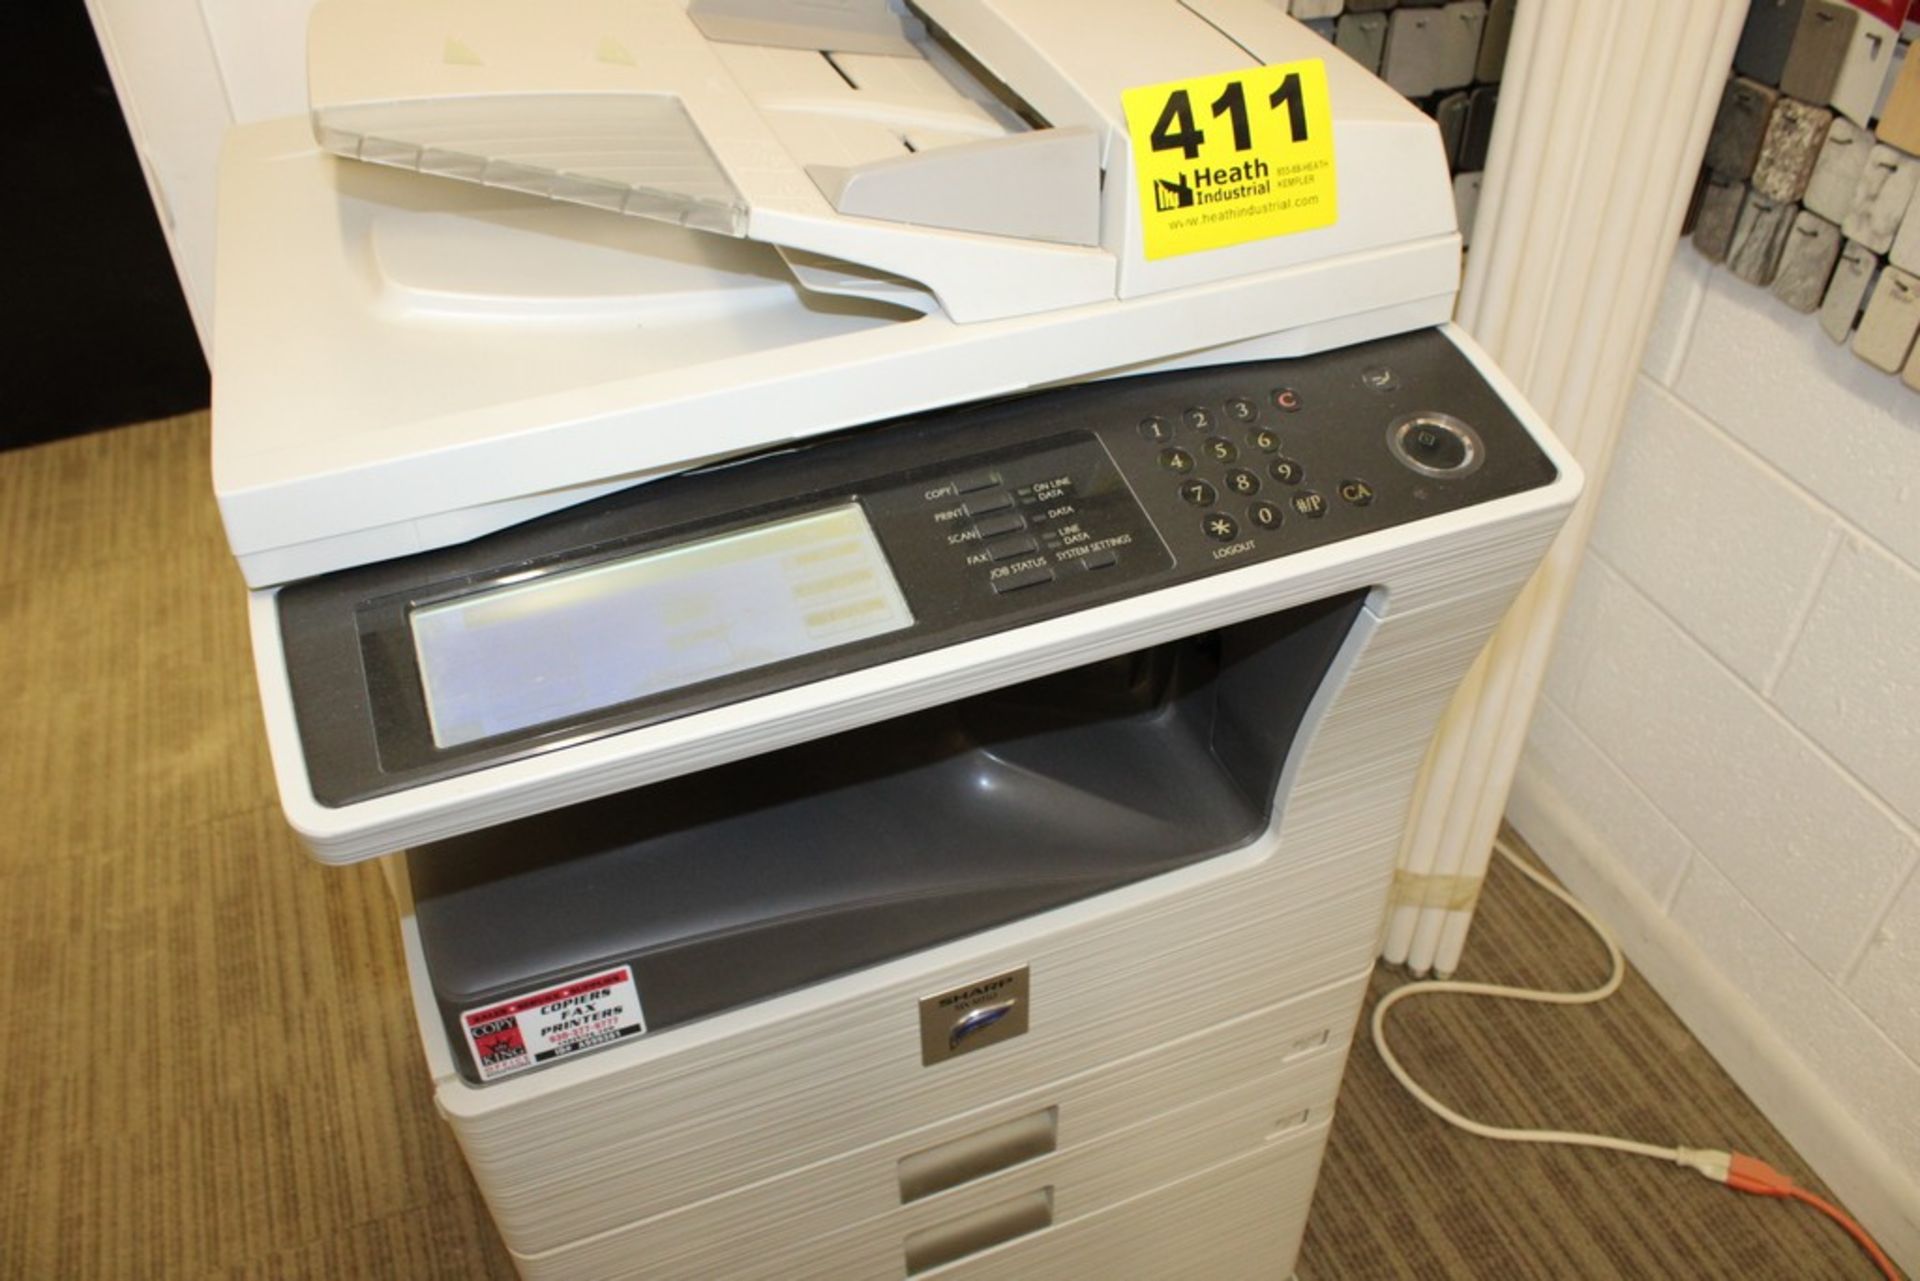 SHARP MODEL MX-M310 CABINET BASED COPIER WITH ADF - Image 2 of 4